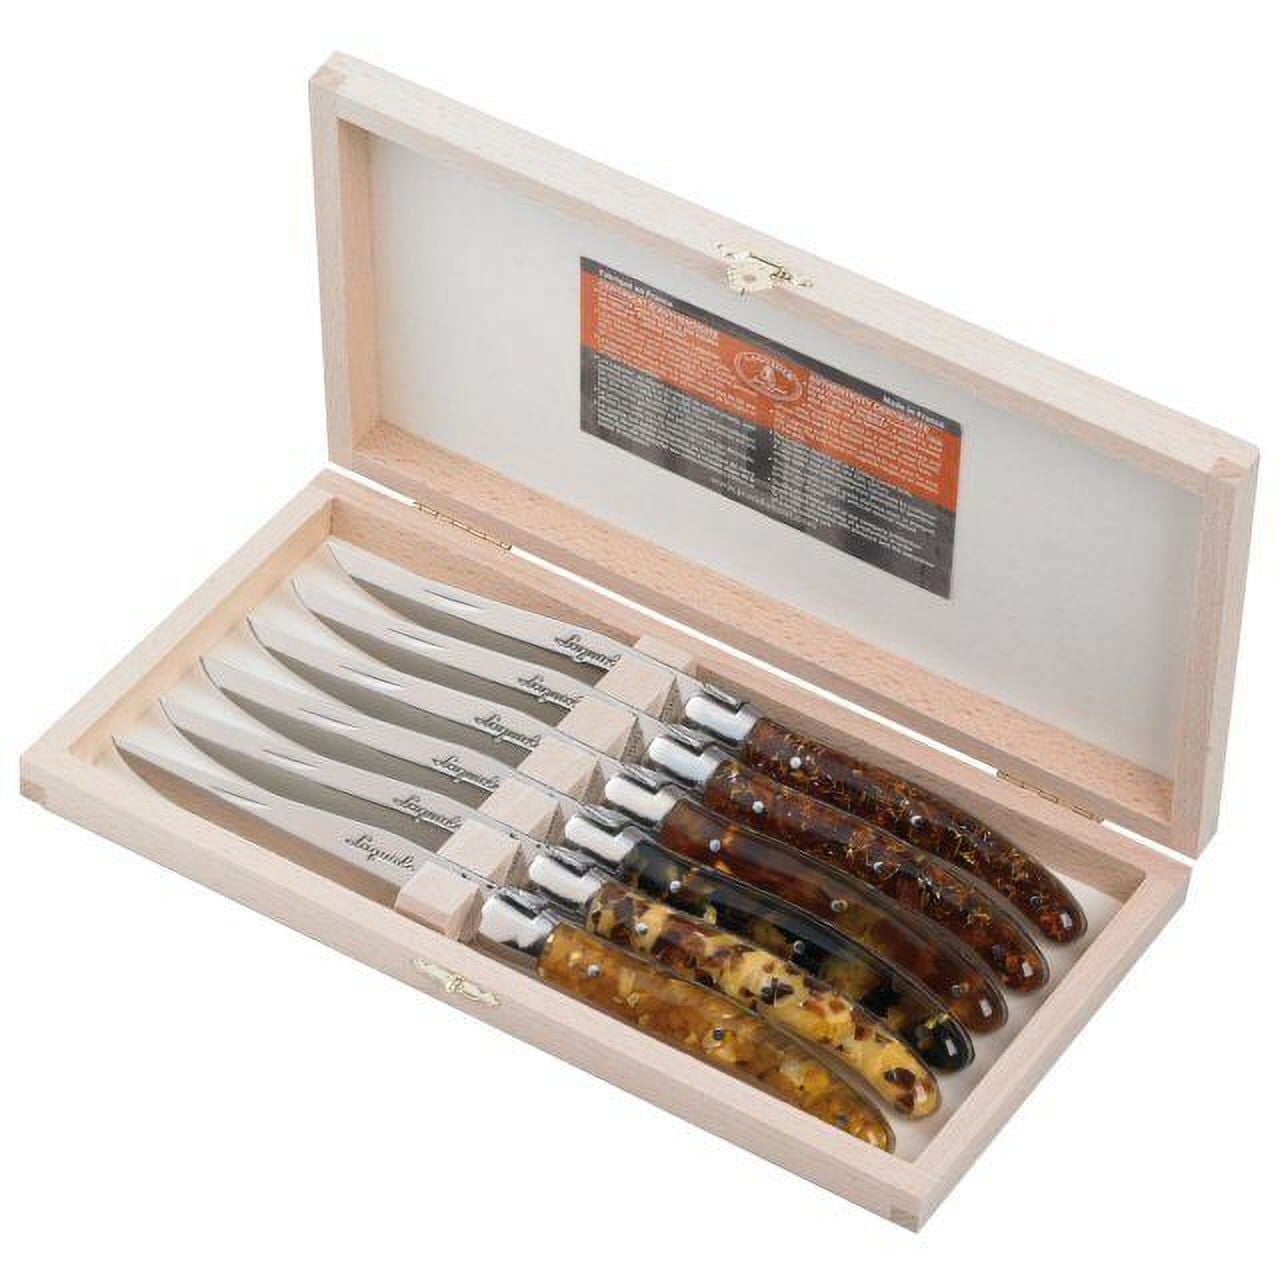 Jean Dubost Olive Wood Carving Set in a Clasp Box